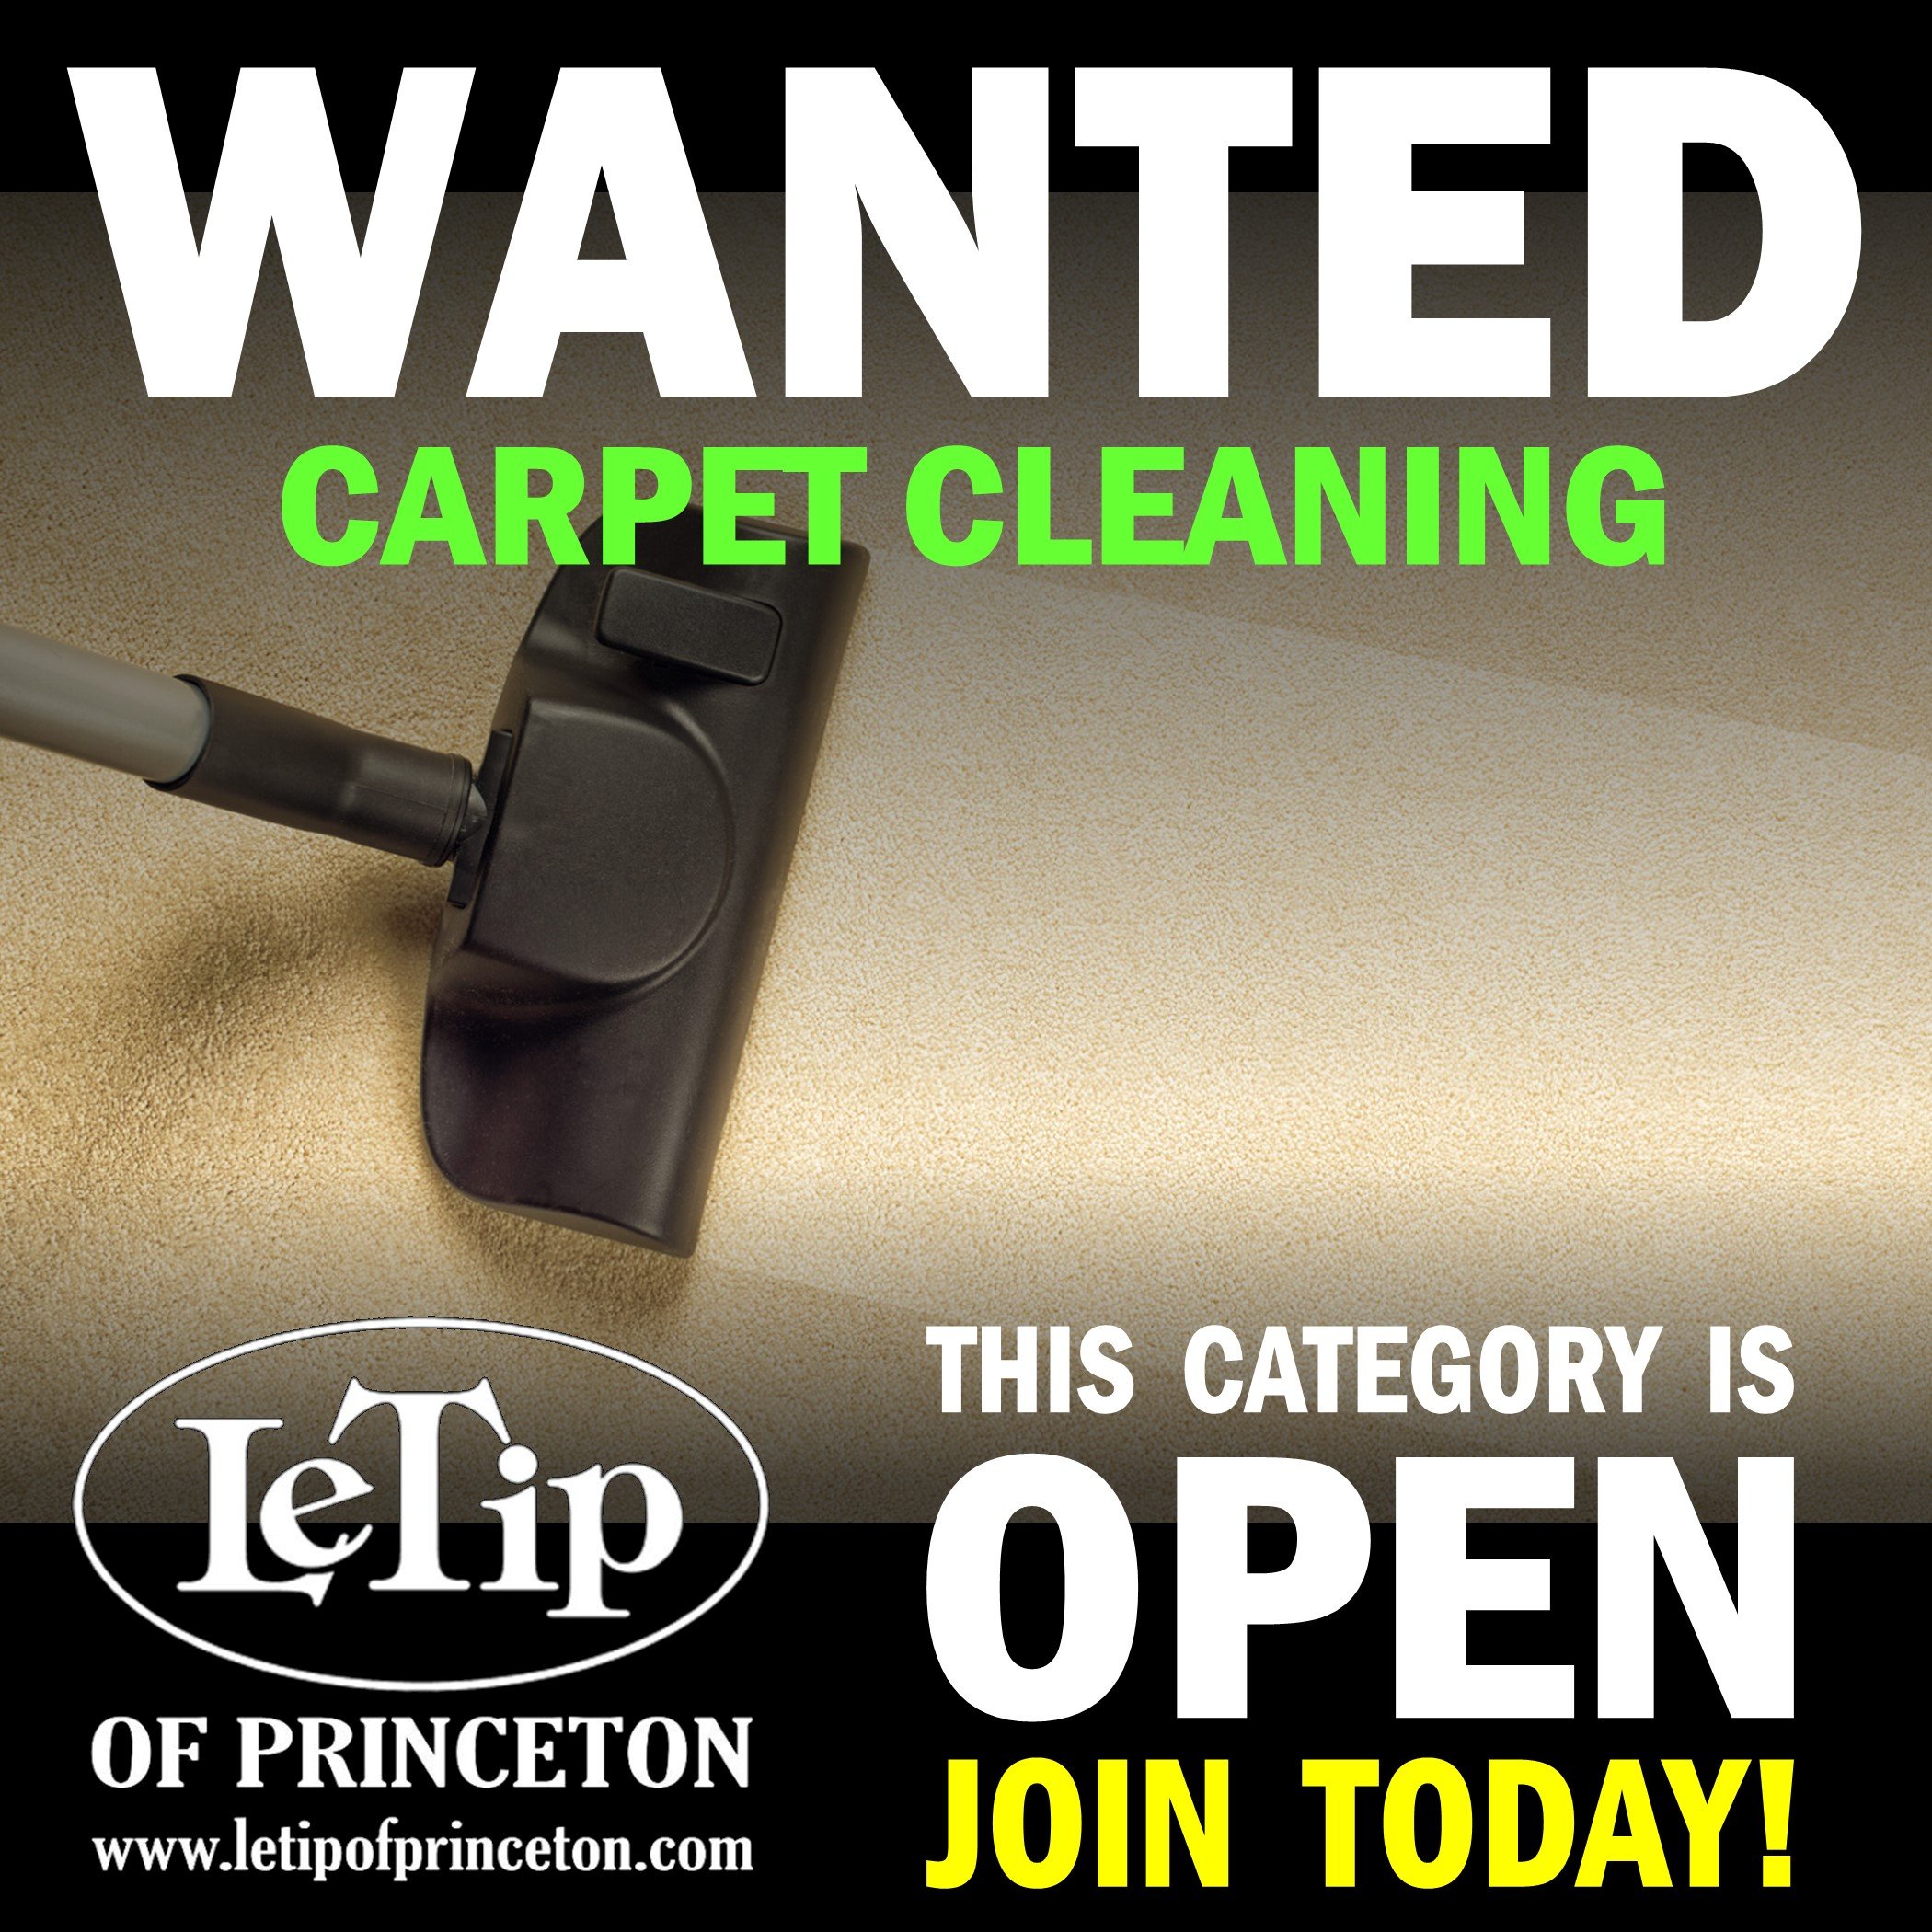 Wanted-CarpetCleaning-v2-1.jpg